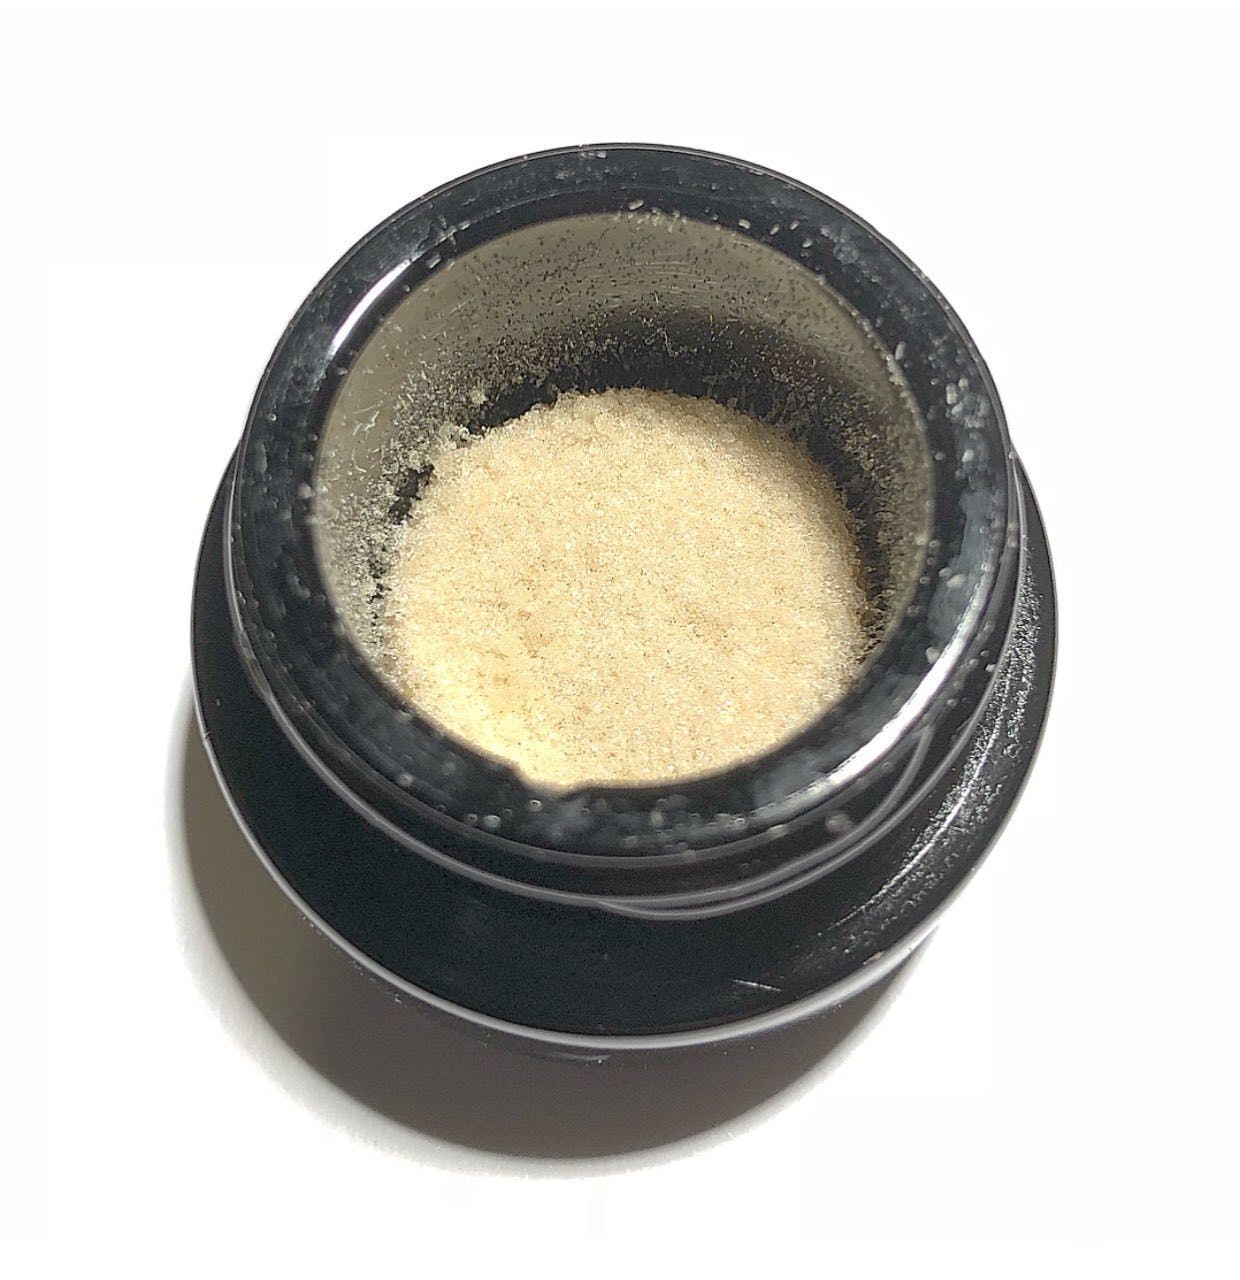 concentrate-710-labs-banana-pie-water-hash